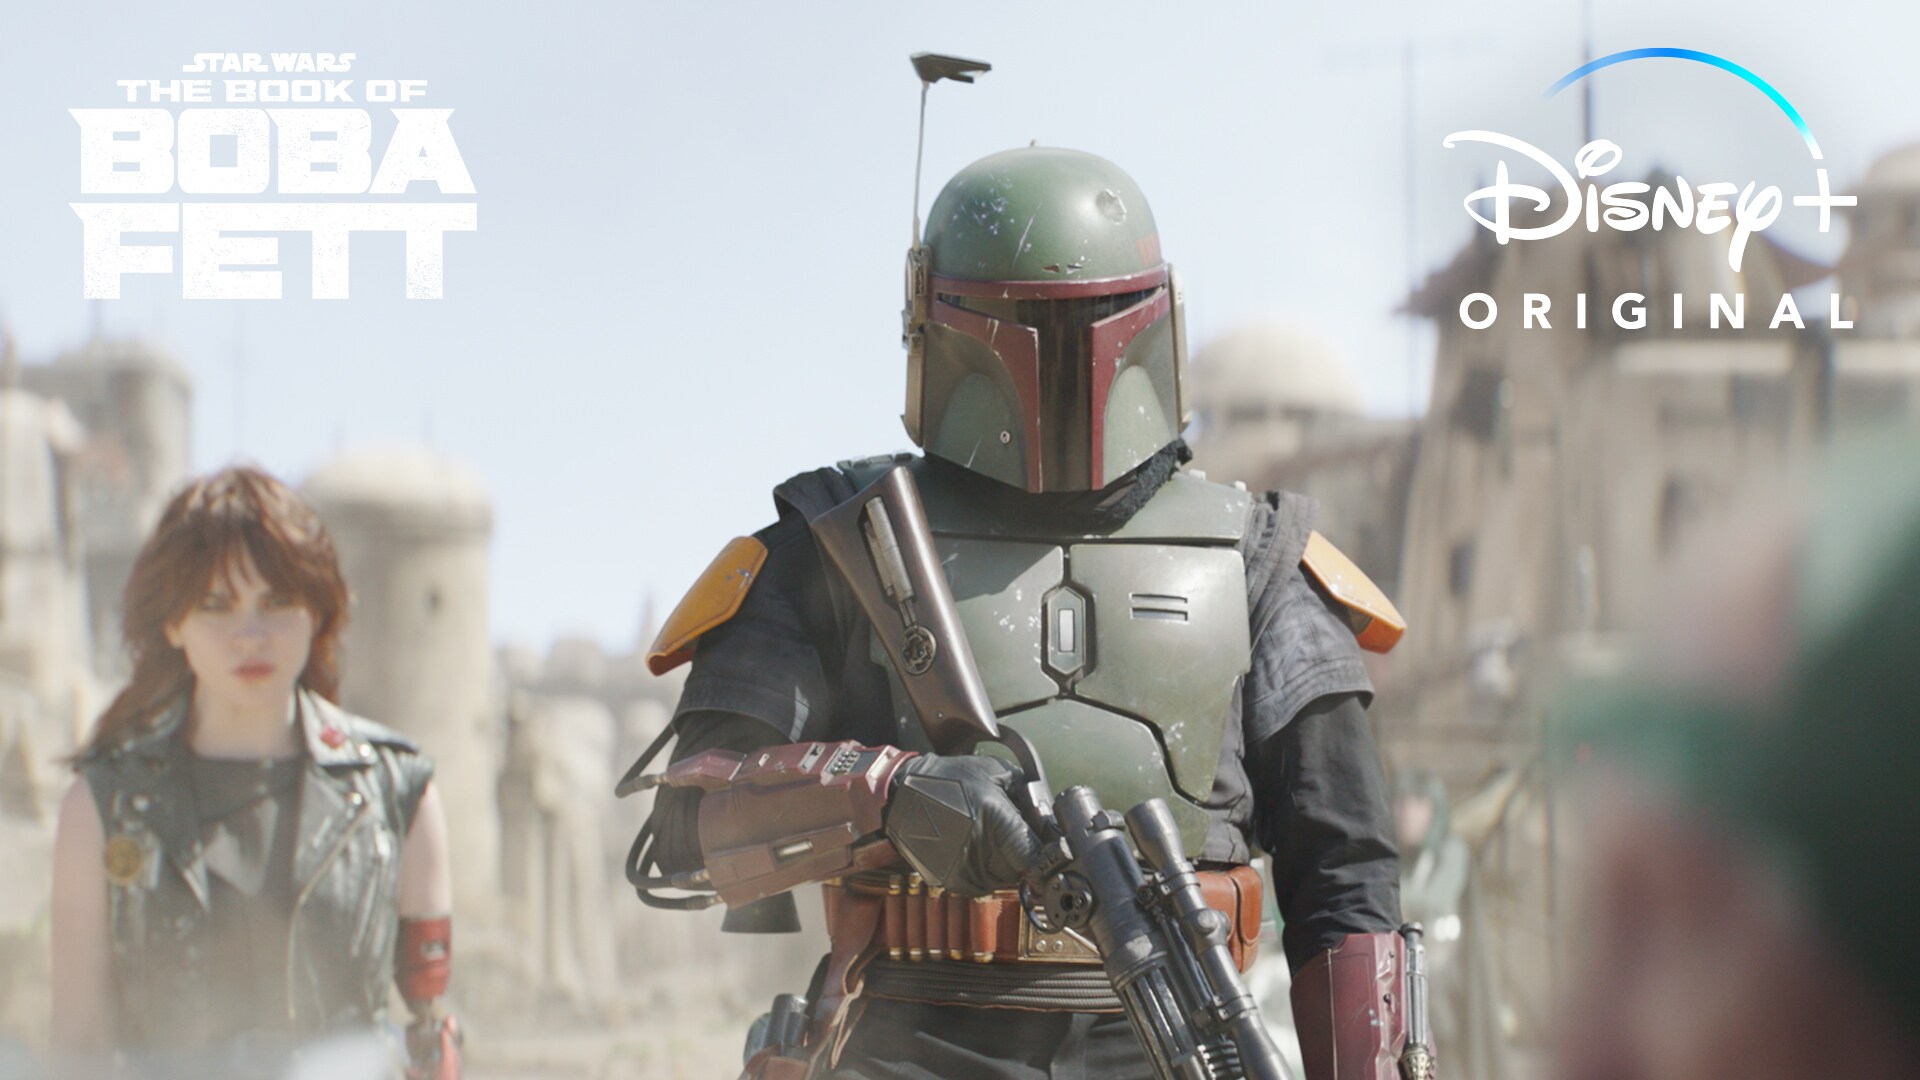 "Muscle" - The Book of Boba Fett